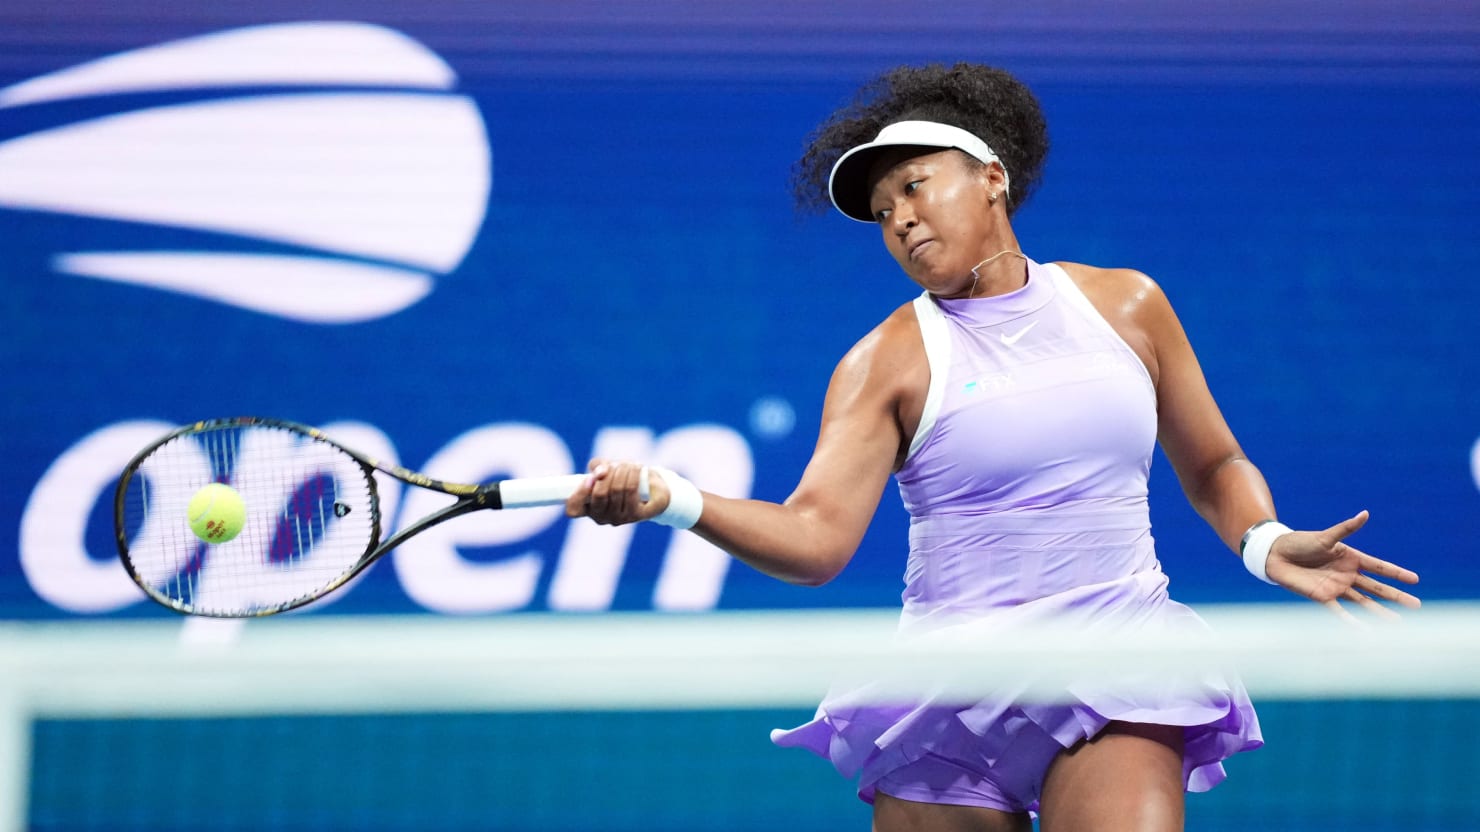 Naomi Osaka fires back at 'archaic' criticism of her